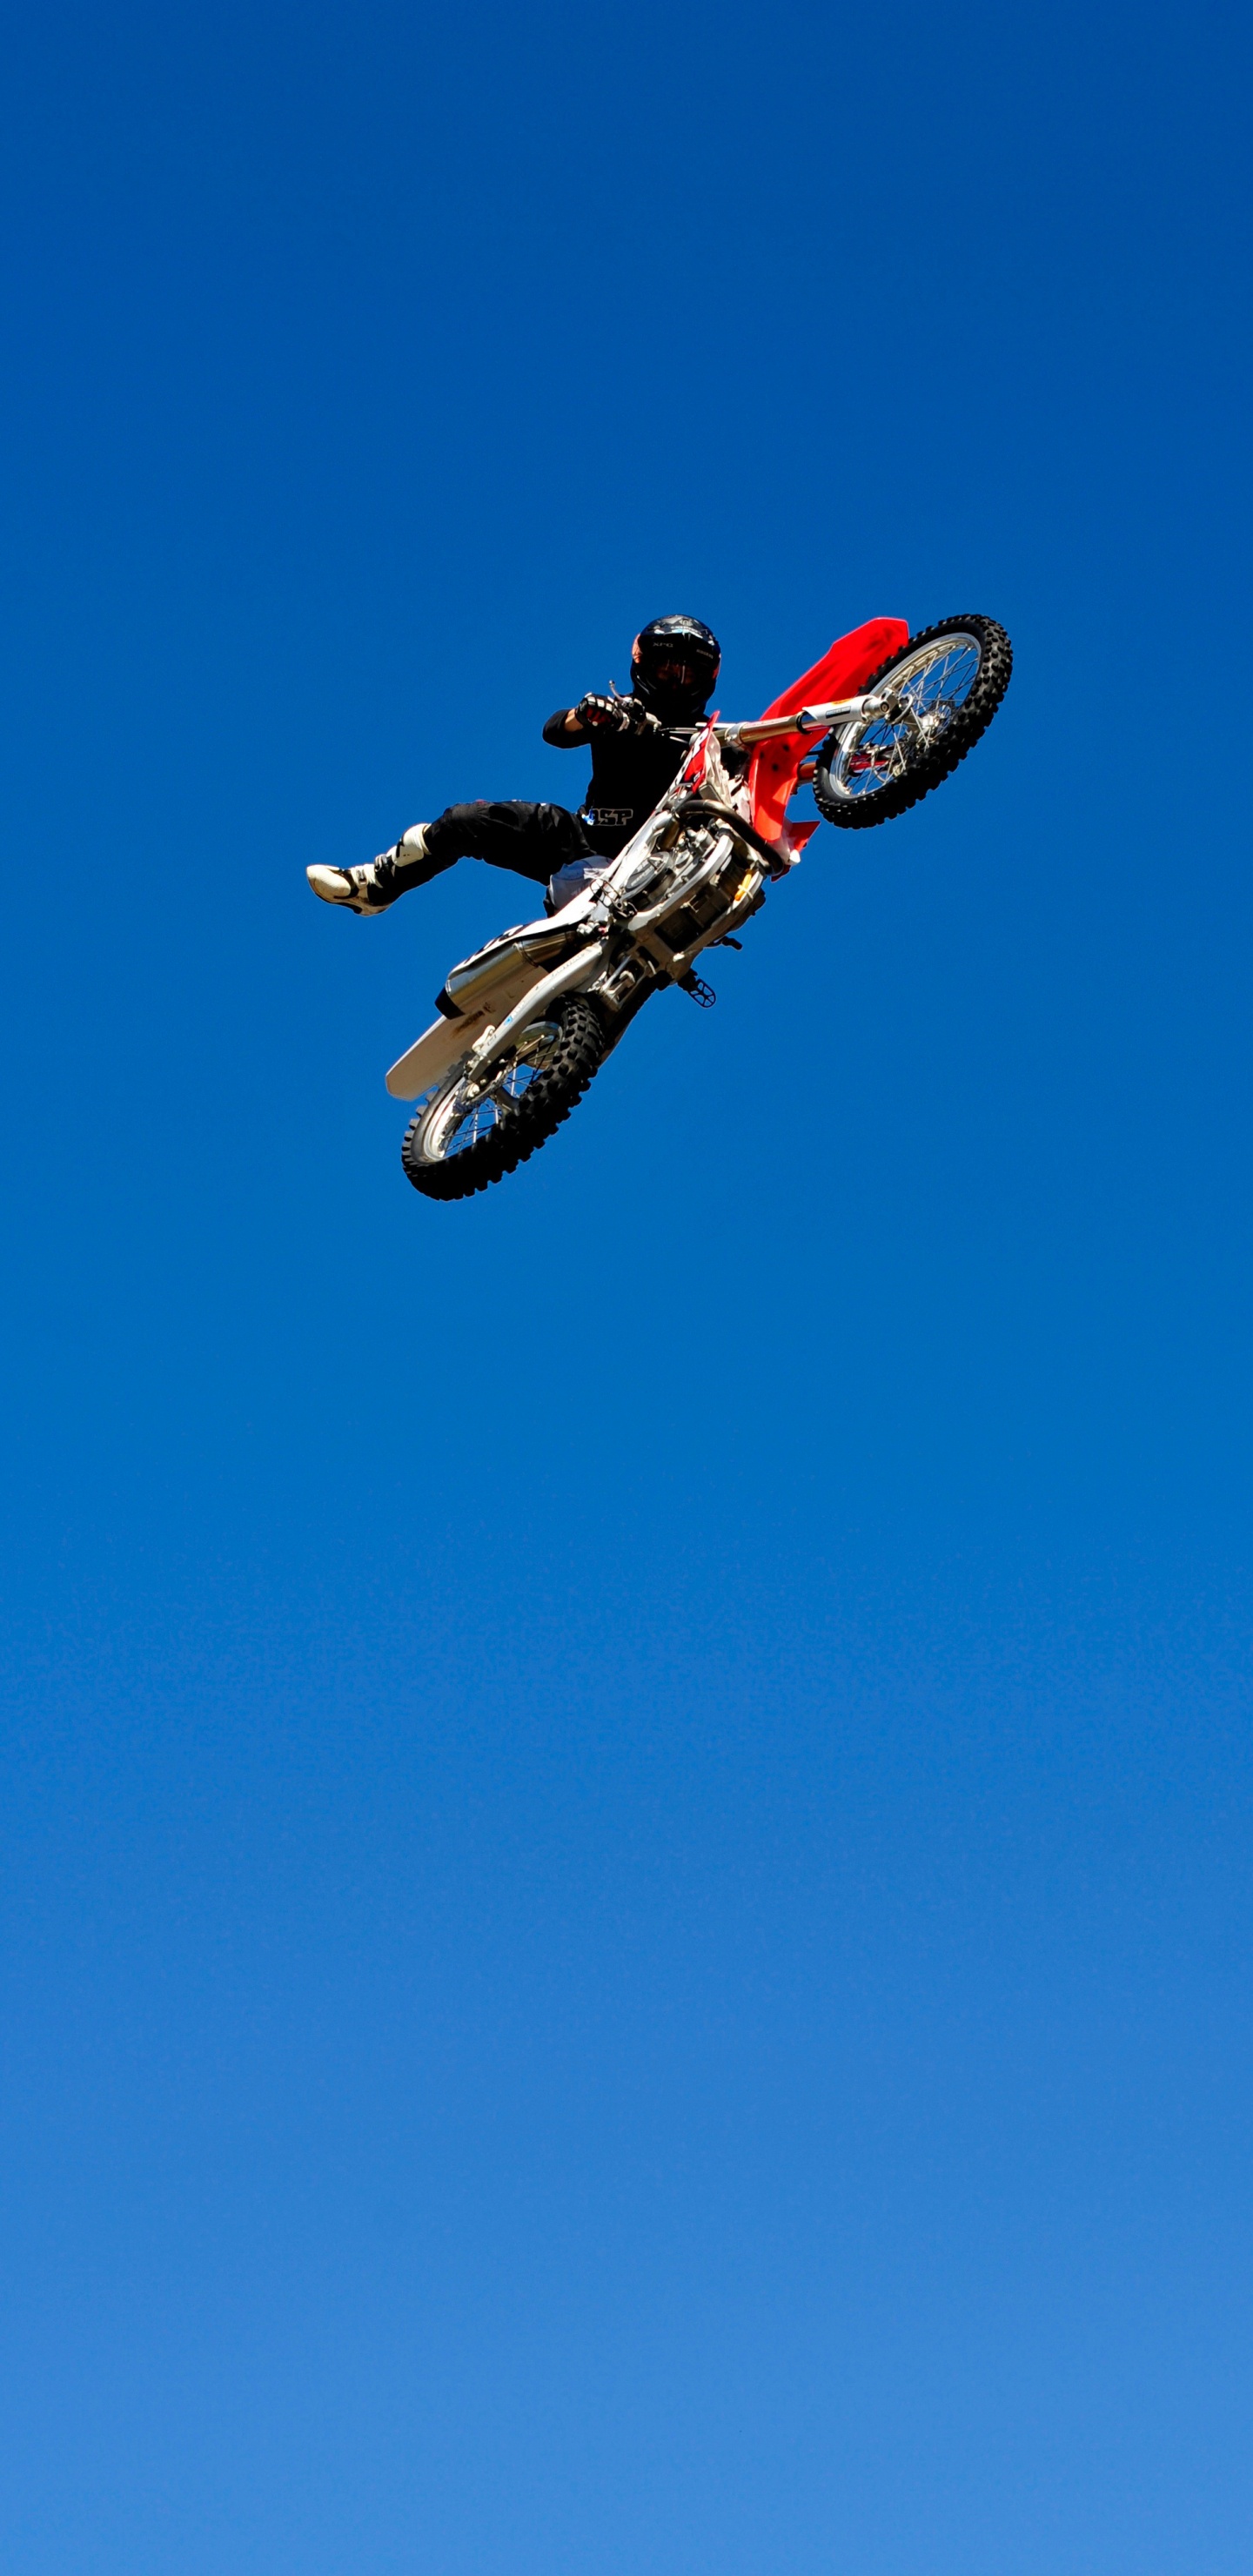 Man in Red and Black Motocross Suit Riding Red and White Motocross Dirt Bike. Wallpaper in 1440x2960 Resolution